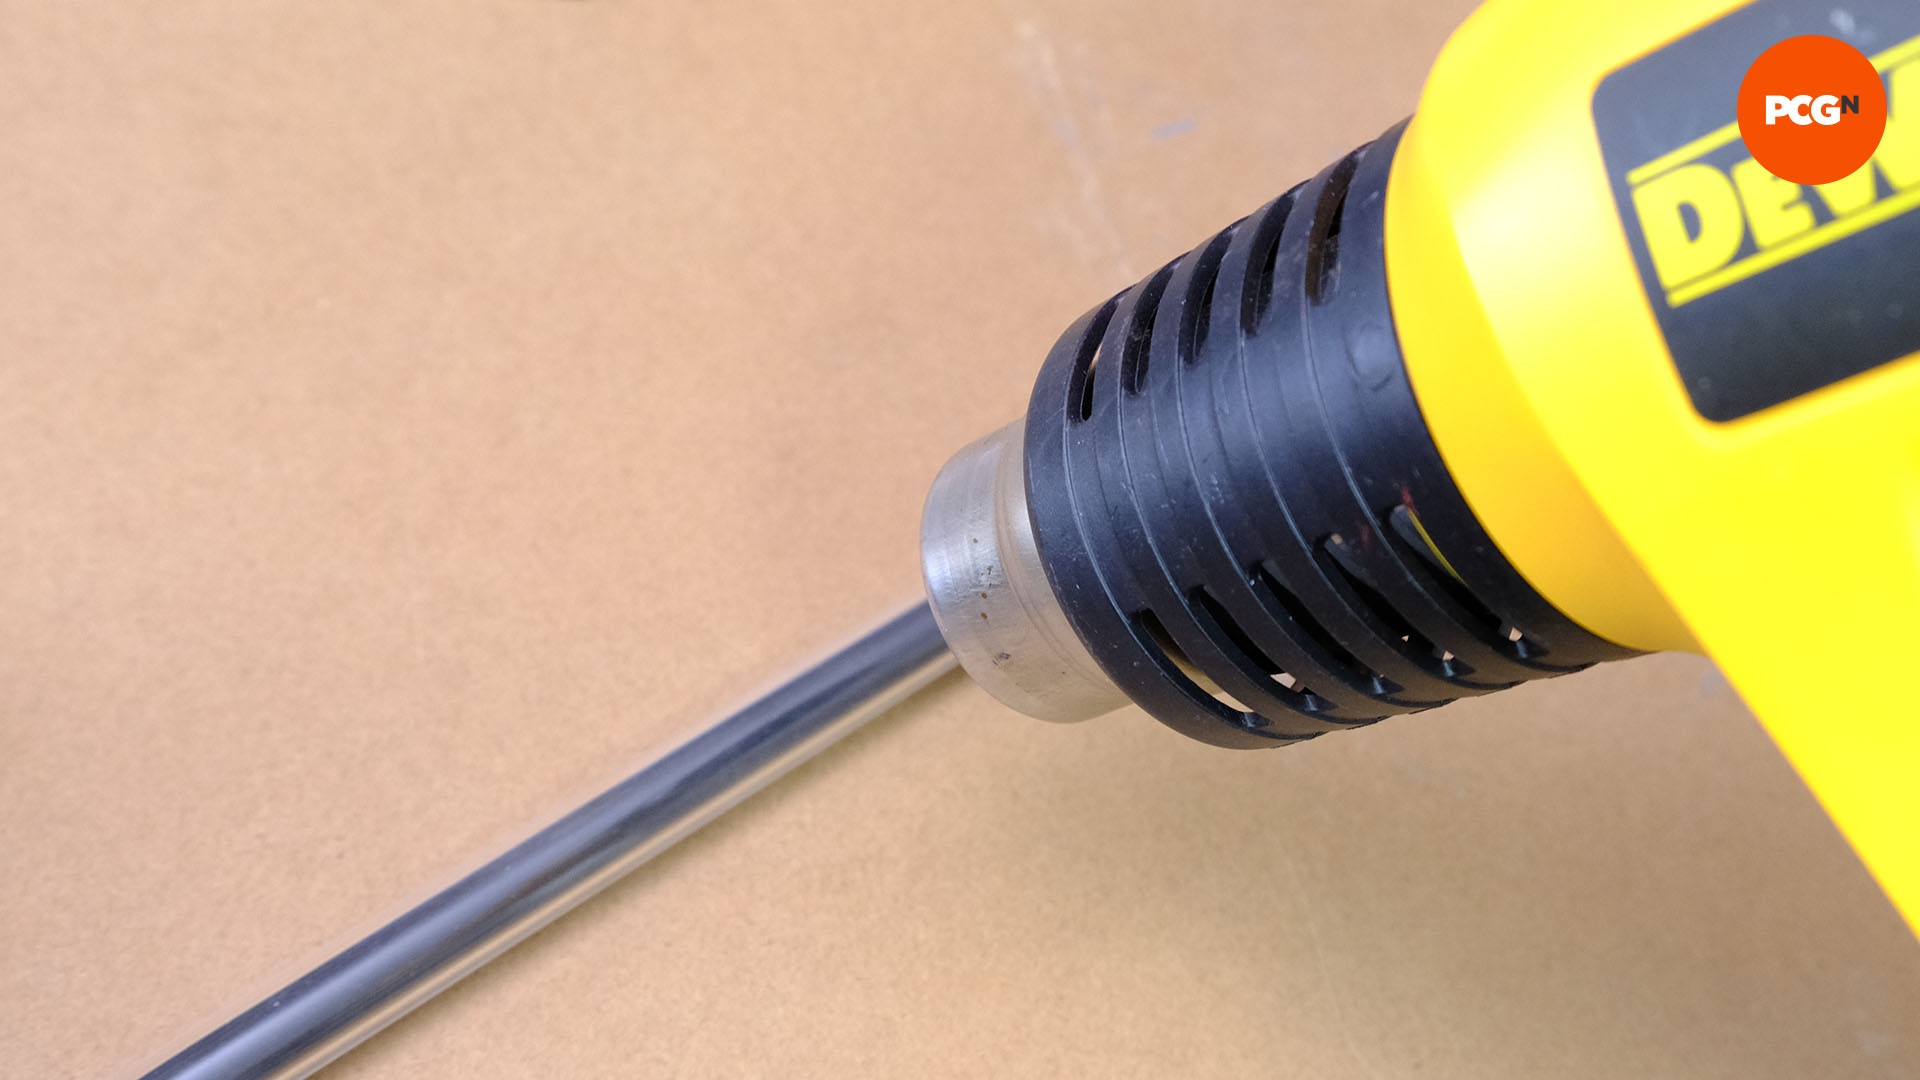 How to cut and bend hard water cooling tubing: Use heat gun